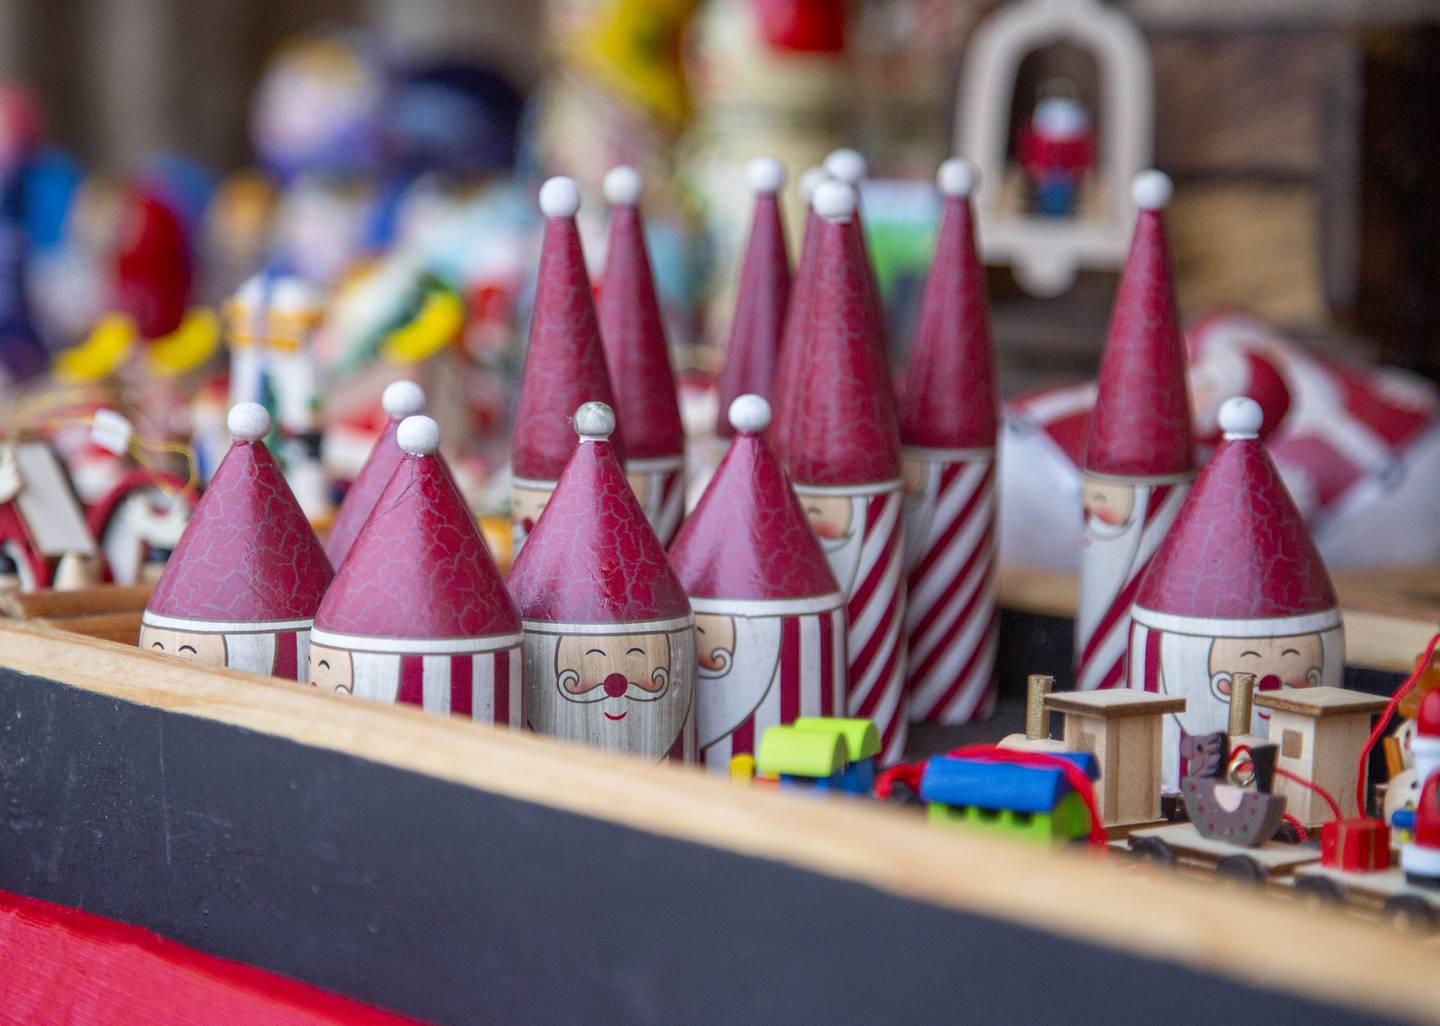 Holiday-themed toys are displayed at one of the huts open at the Chris Kringle Market in Ottawa. The Market will be open again Friday, Dec. 10, through Sunday, Dec. 12; Friday, Dec. 17 through Sunday, Dec. 19. Vendors are in the Jordan block as well as Washington Square and Jackson Street.